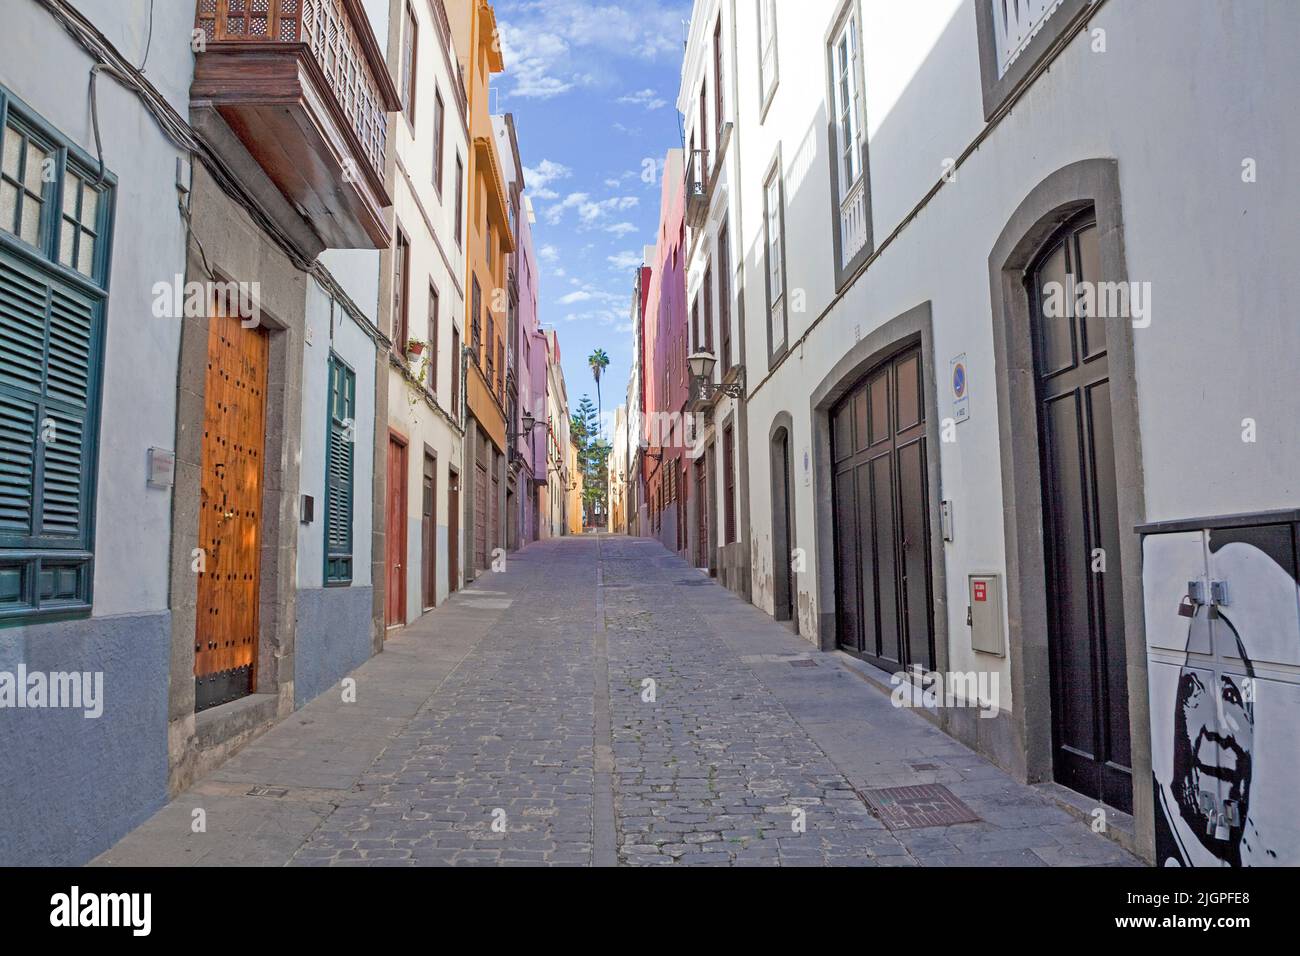 Alley in the old town Vegueta, Las Palmas, Grand Canary, Canary islands, Spain, Europe Stock Photo